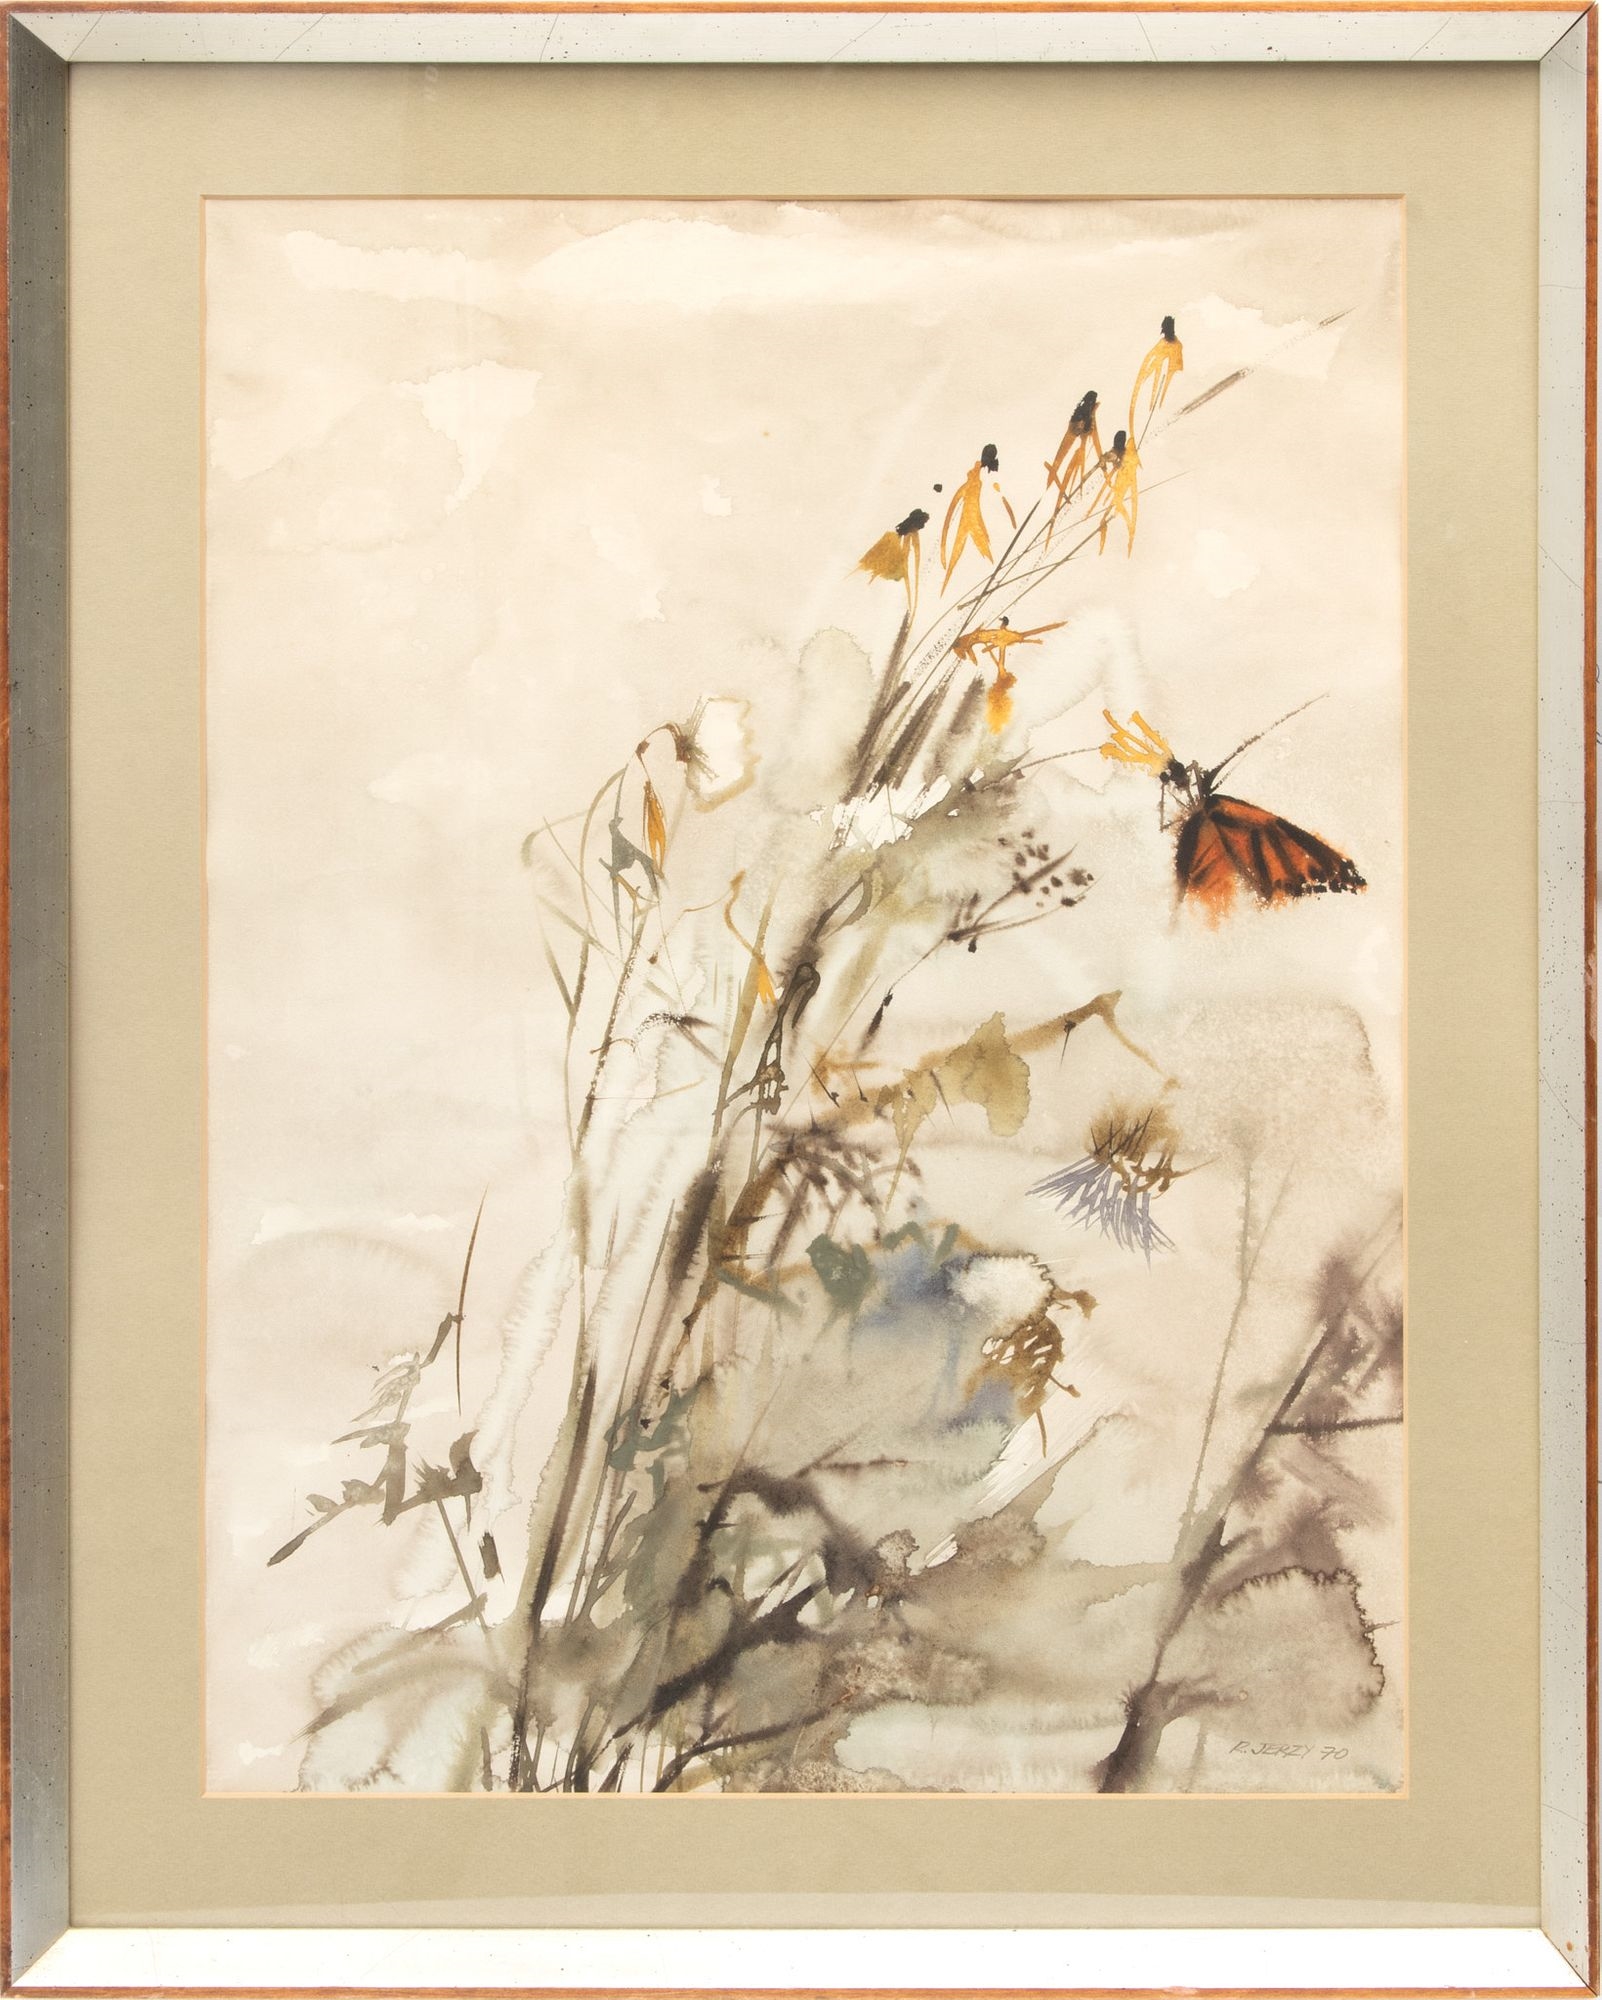 Artwork by Richard Jerzy, Richard Jerzy (American, 1943-2001) Watercolor on Paper, 1970, "Monarch Butterfly", H 24" W 18", Made of Watercolor on Paper